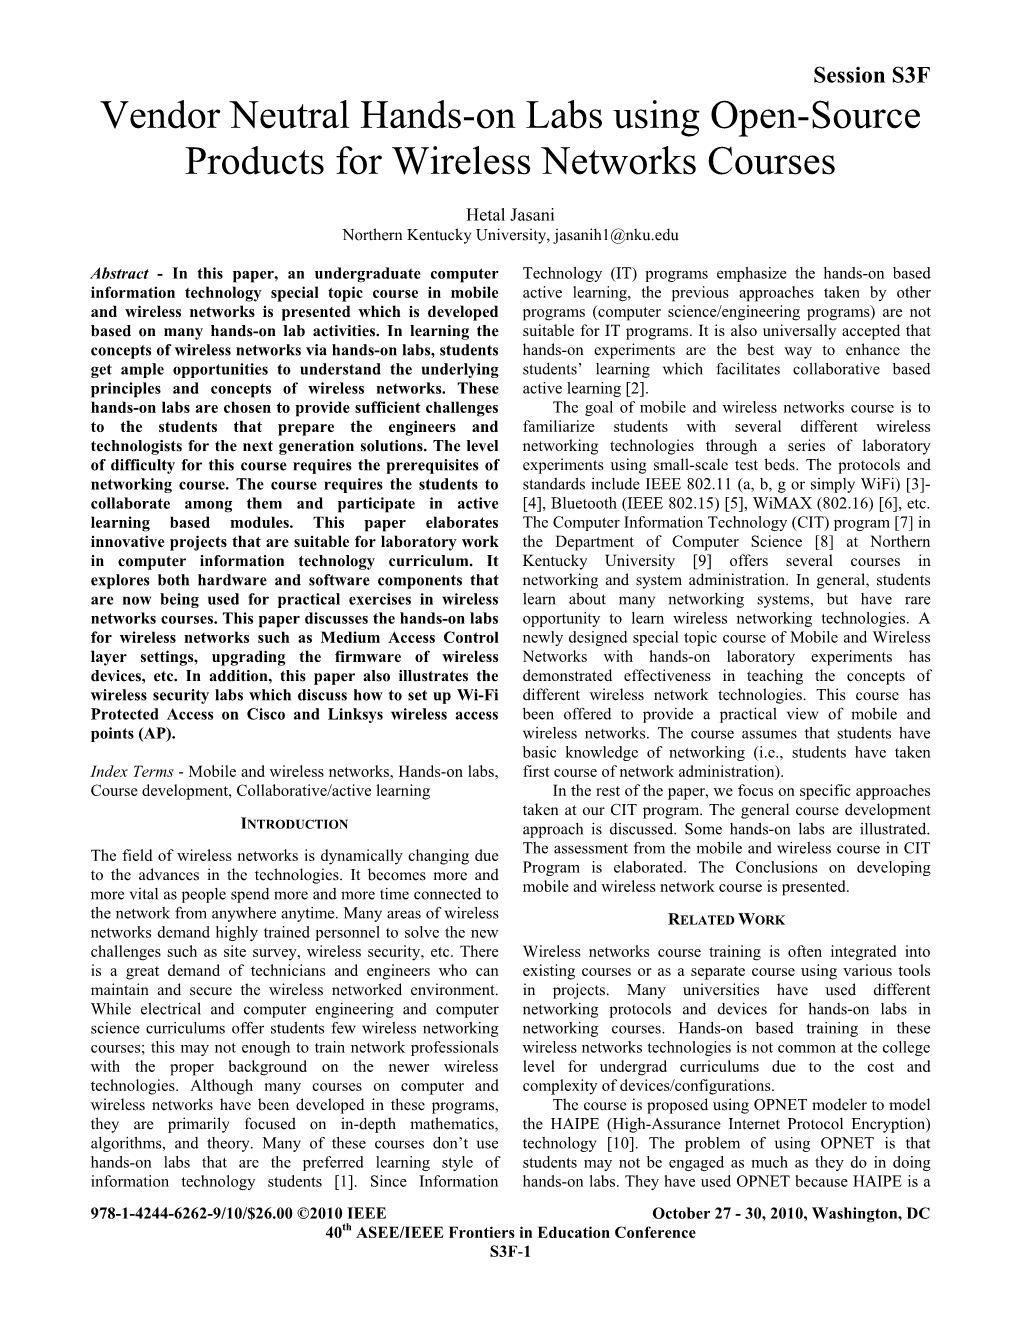 Vendor Neutral Hands-On Labs Using Open-Source Products for Wireless